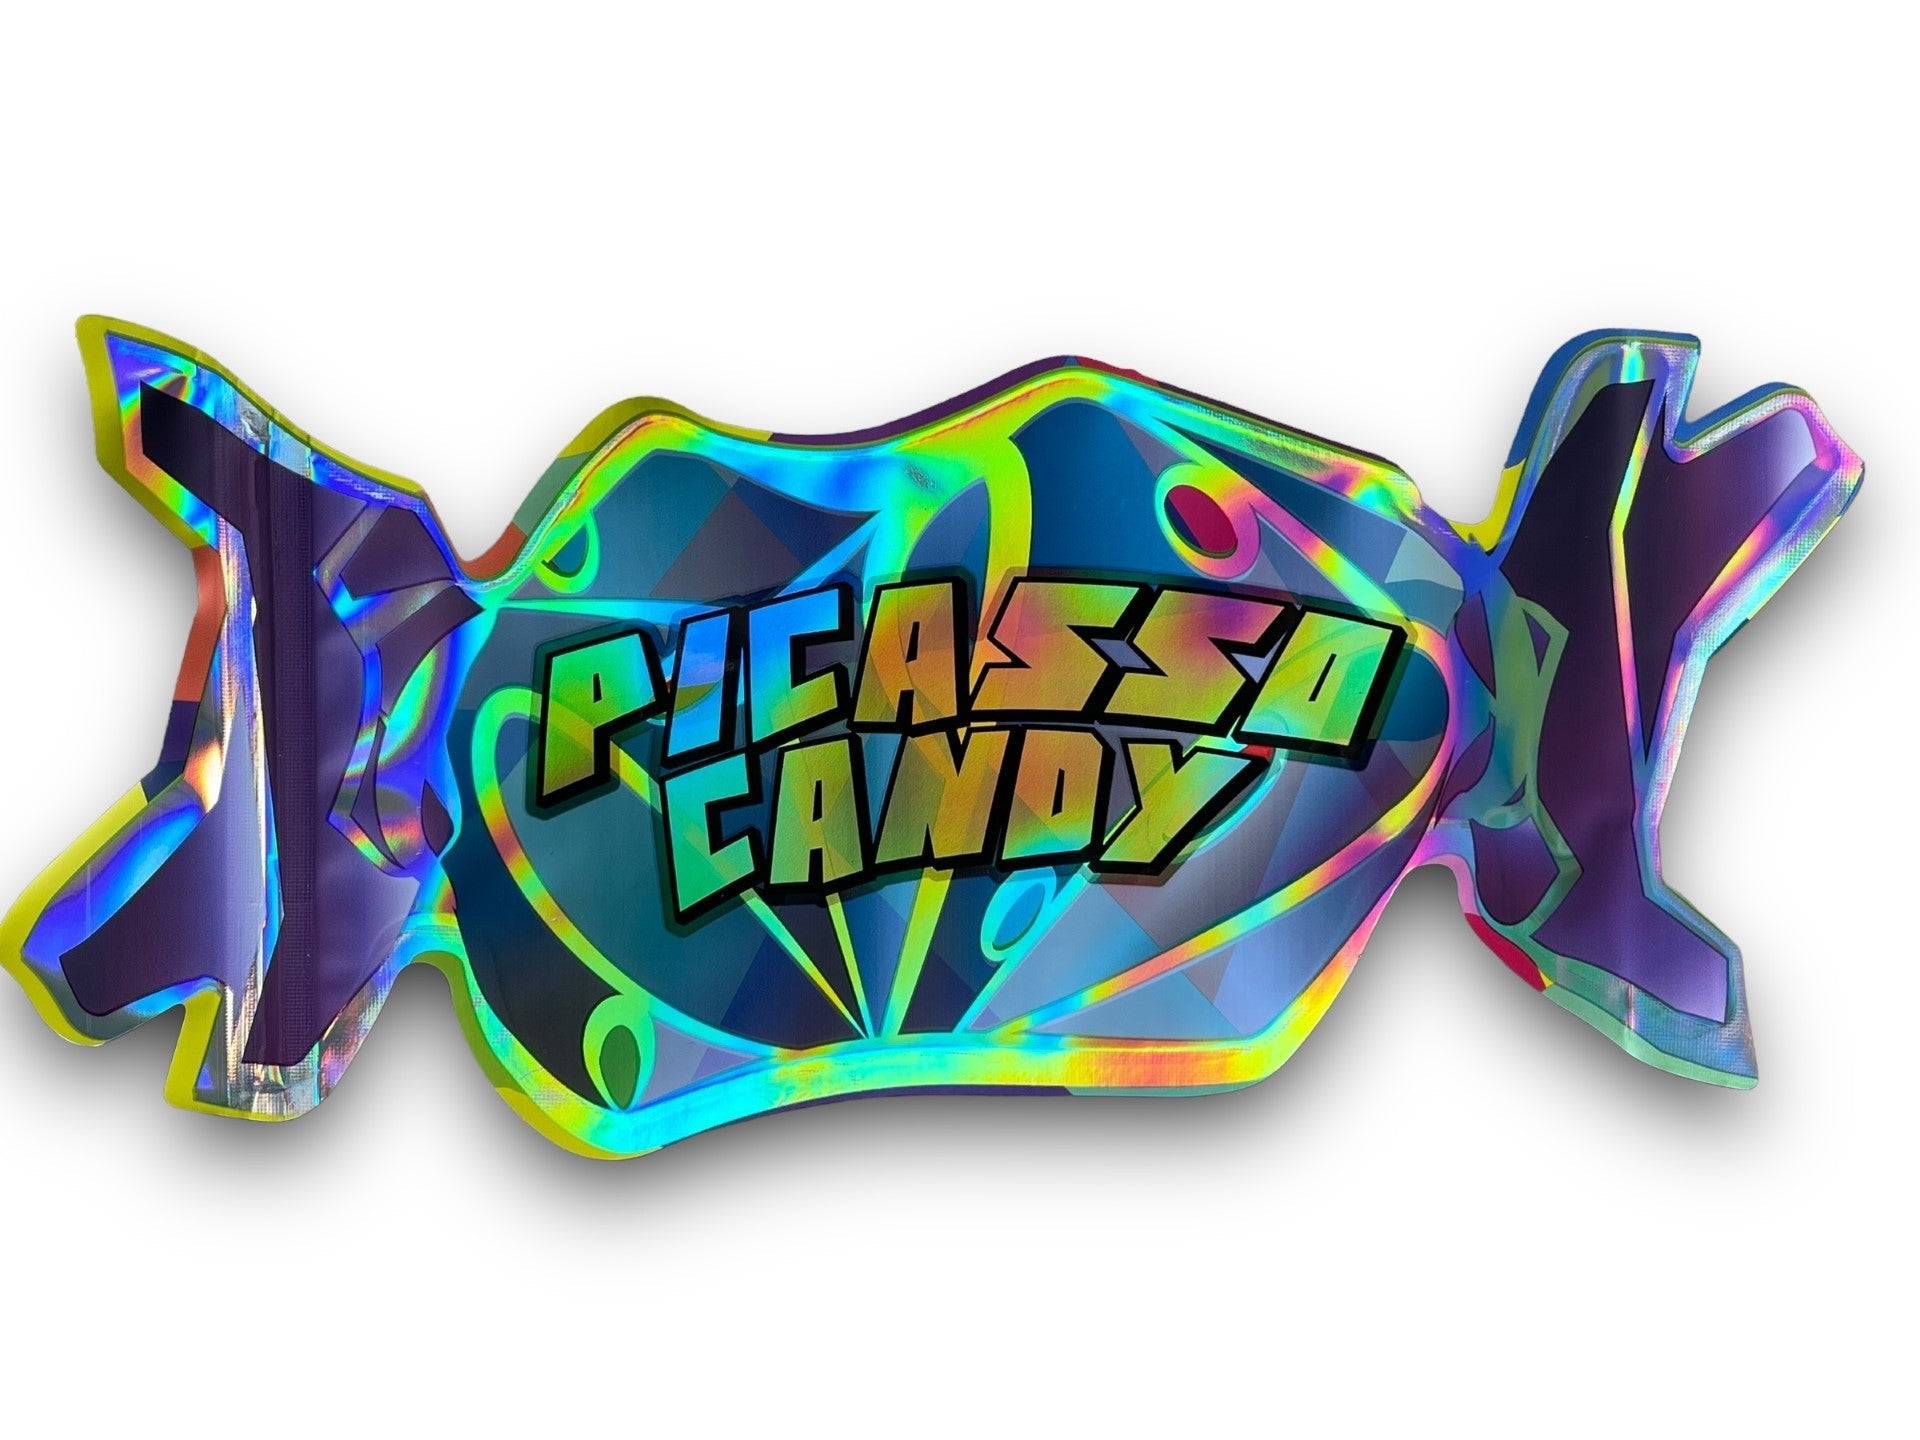 Picasso Candy Mylar Bag Holographic Upside Down